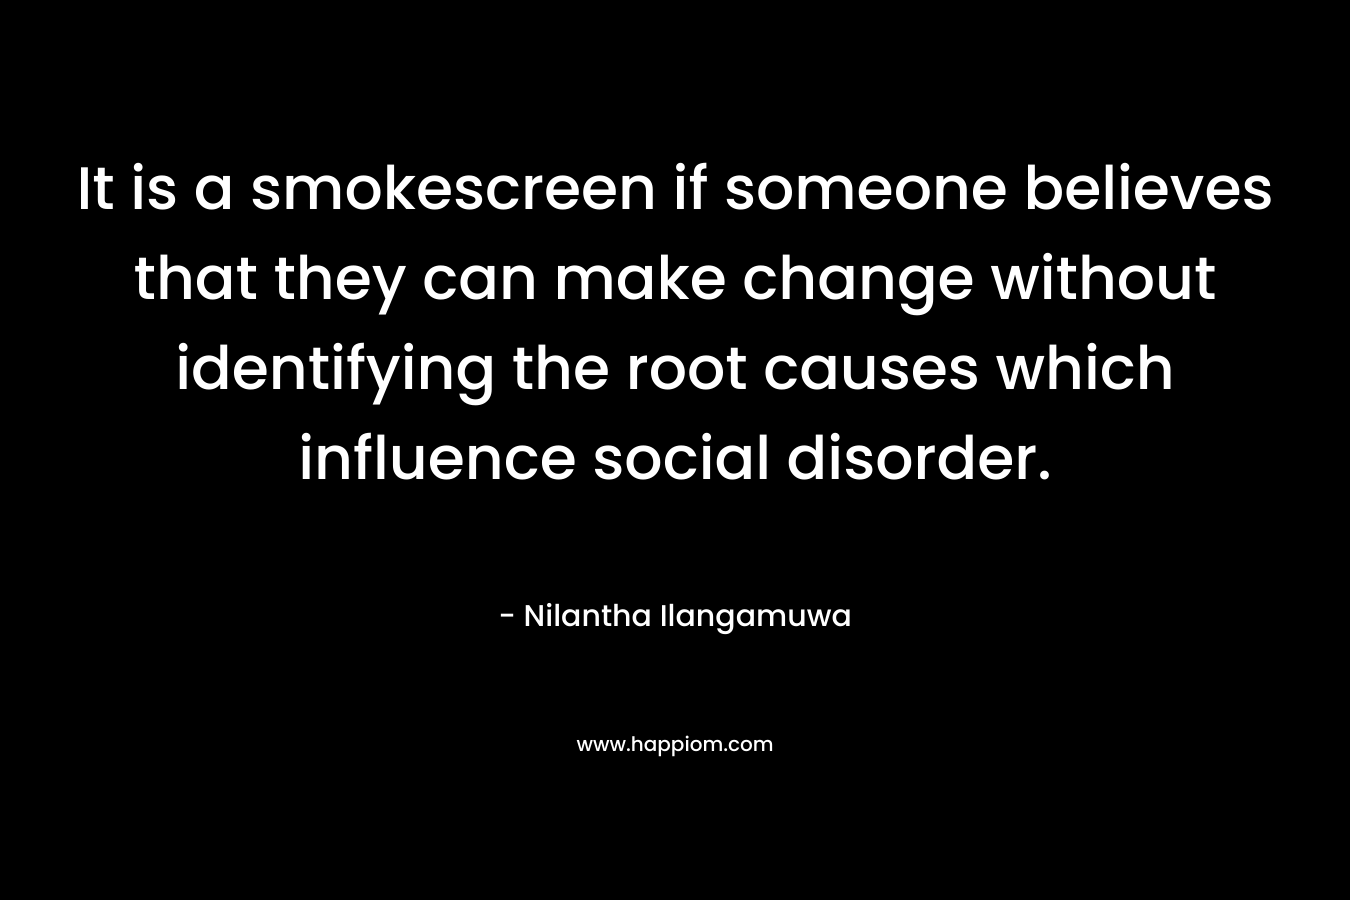 It is a smokescreen if someone believes that they can make change without identifying the root causes which influence social disorder. – Nilantha Ilangamuwa